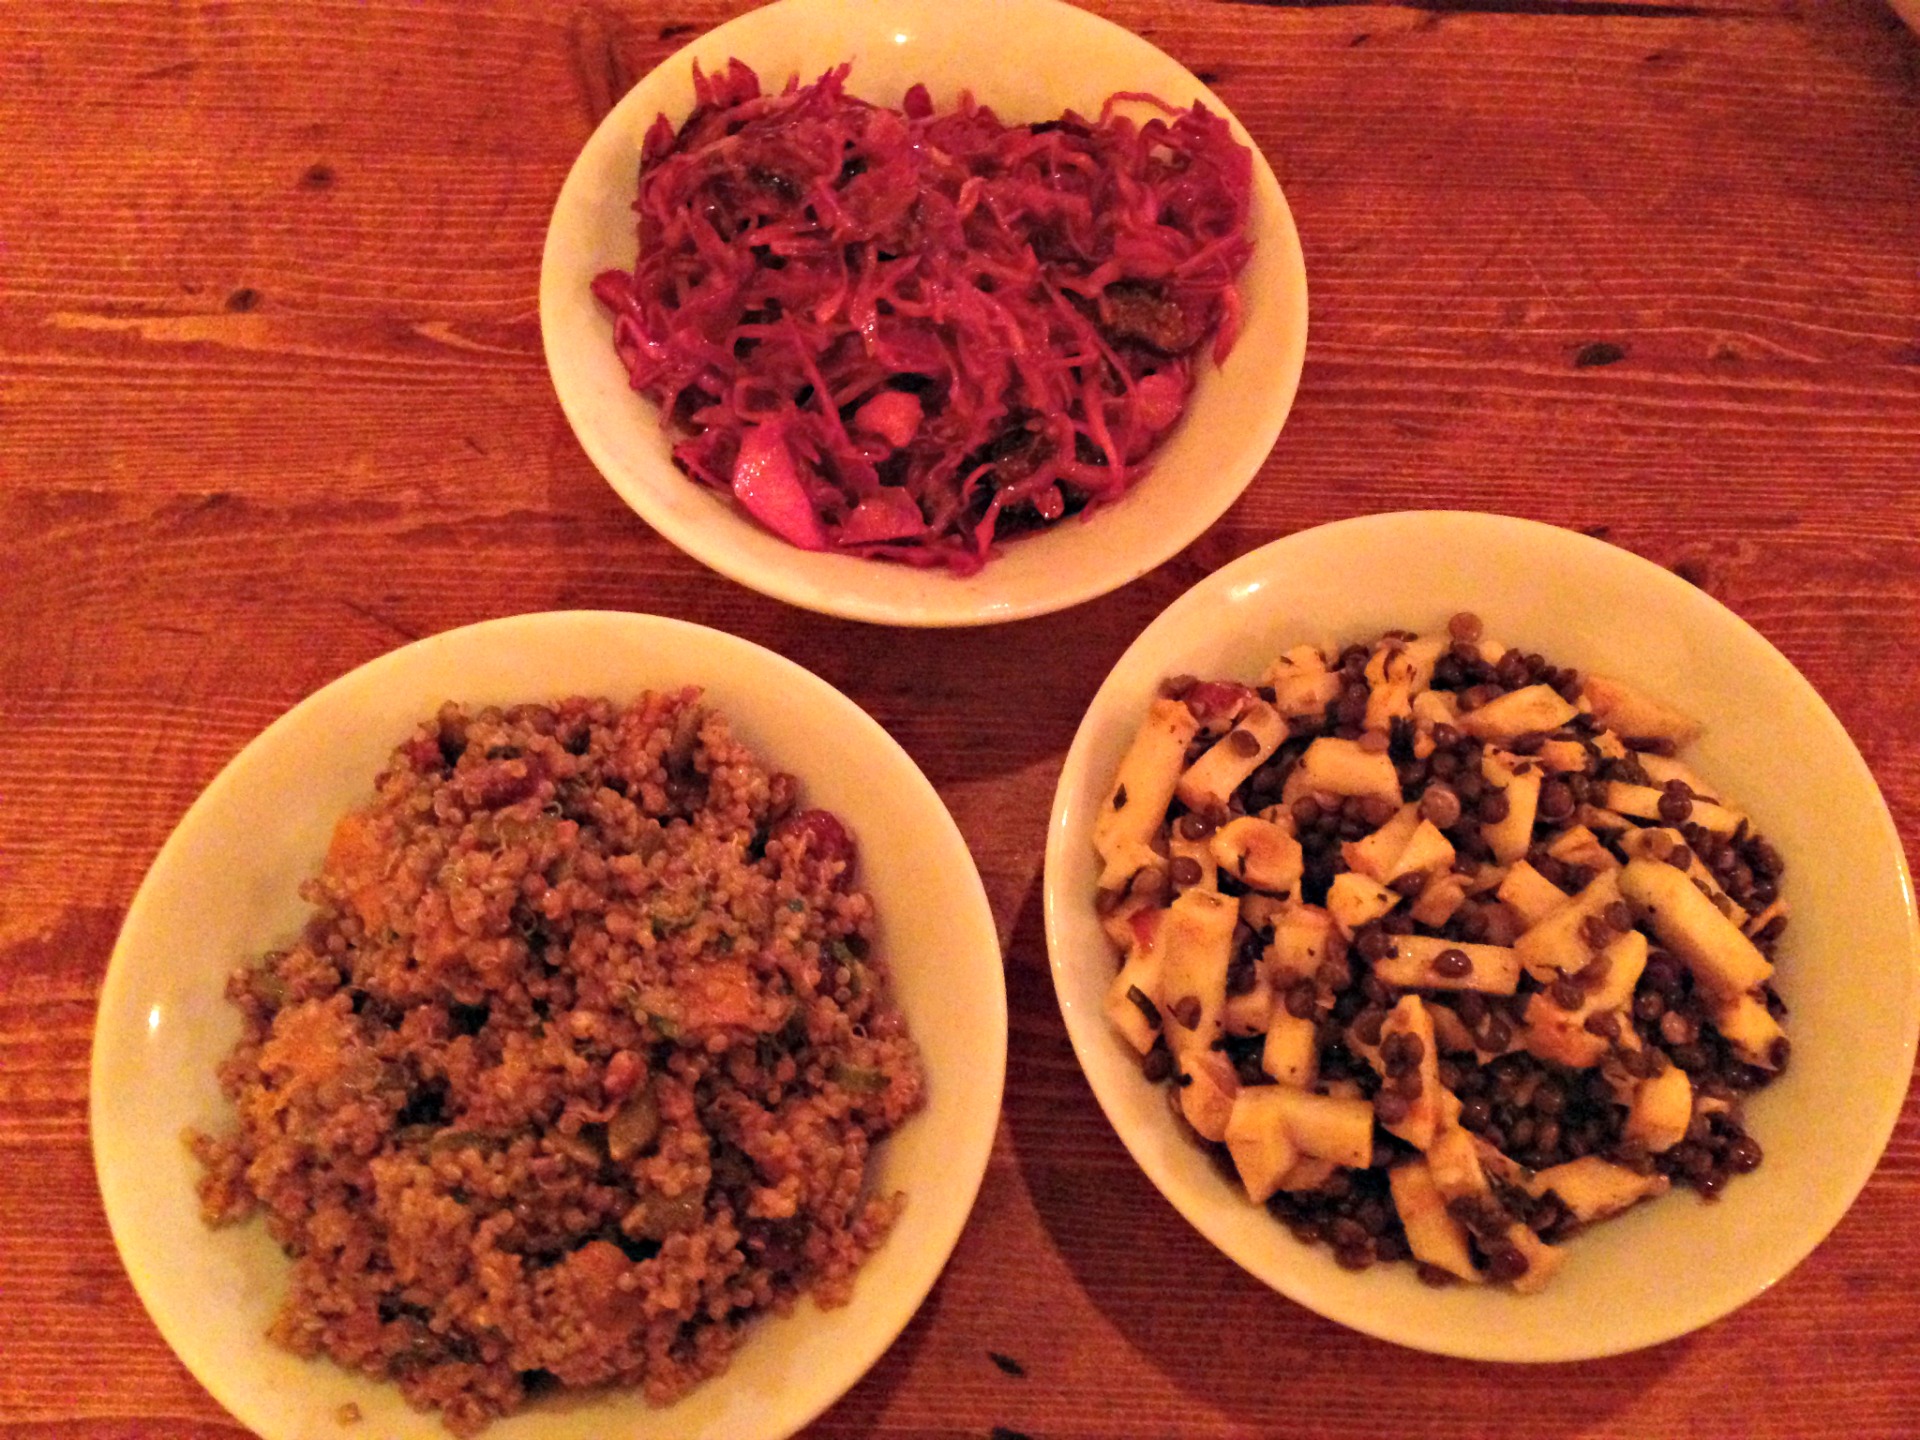 Salads at Ba Bite, clockwise from top: cabbage, lentil and celeriac, and butternut squash and quinoa.